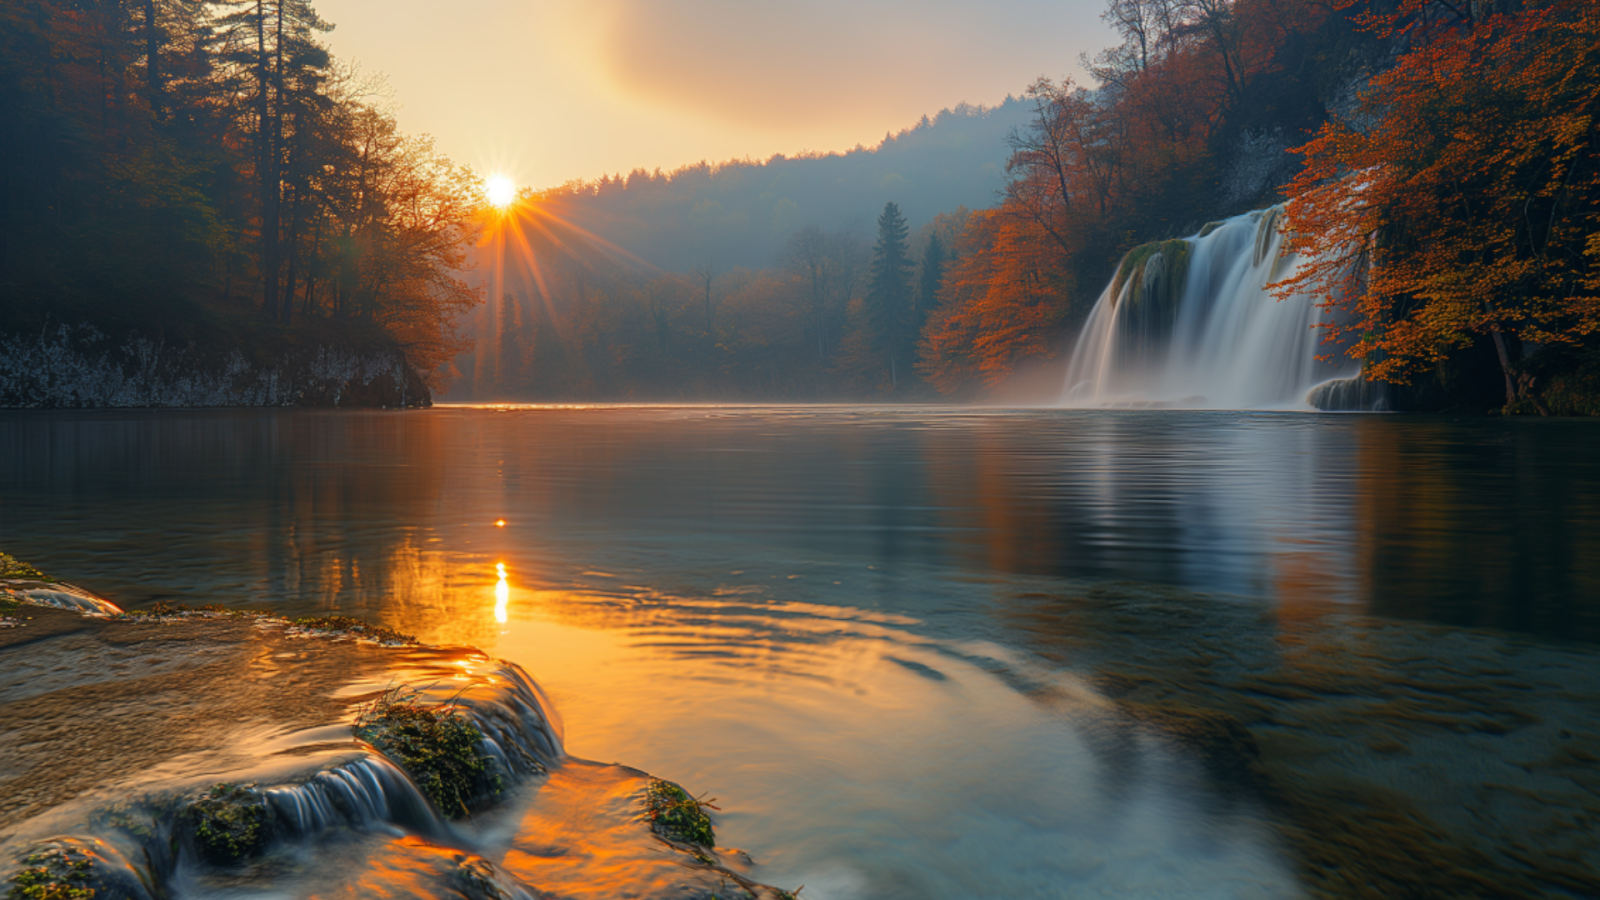 Sunset casting a serene glow over the reflective waters and cascading falls of Plitvice Lakes National Park.